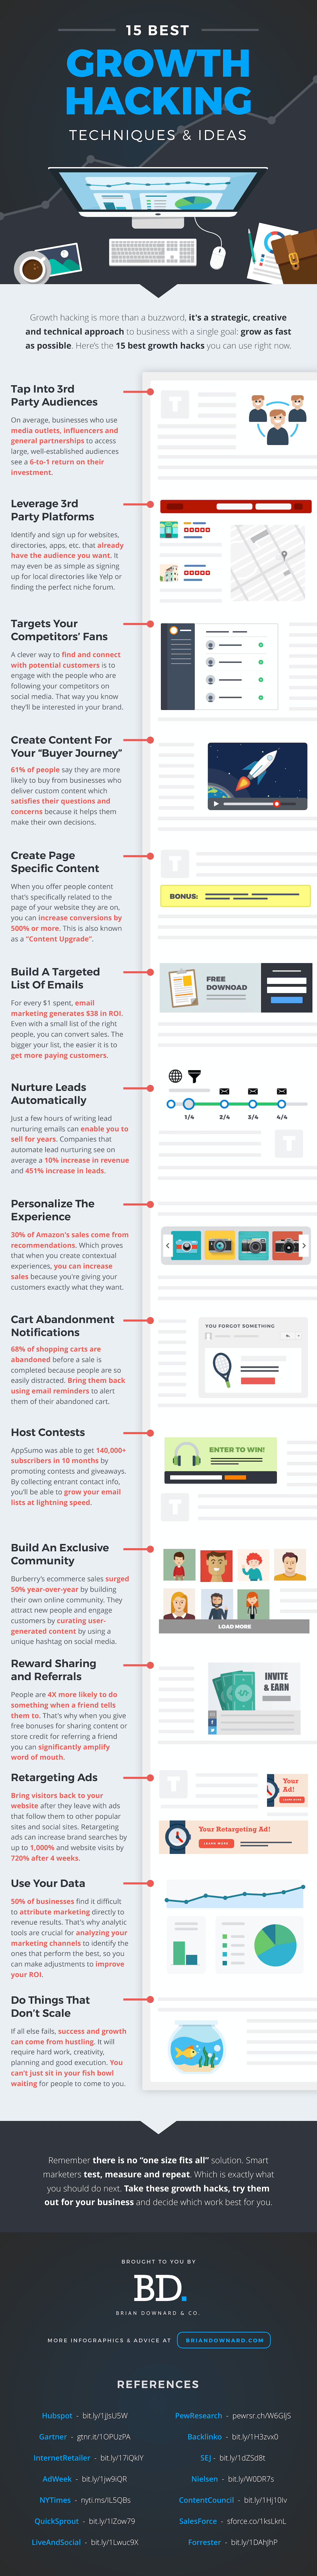 15 Winning Growth Hacking Techniques & Strategies #Infographic